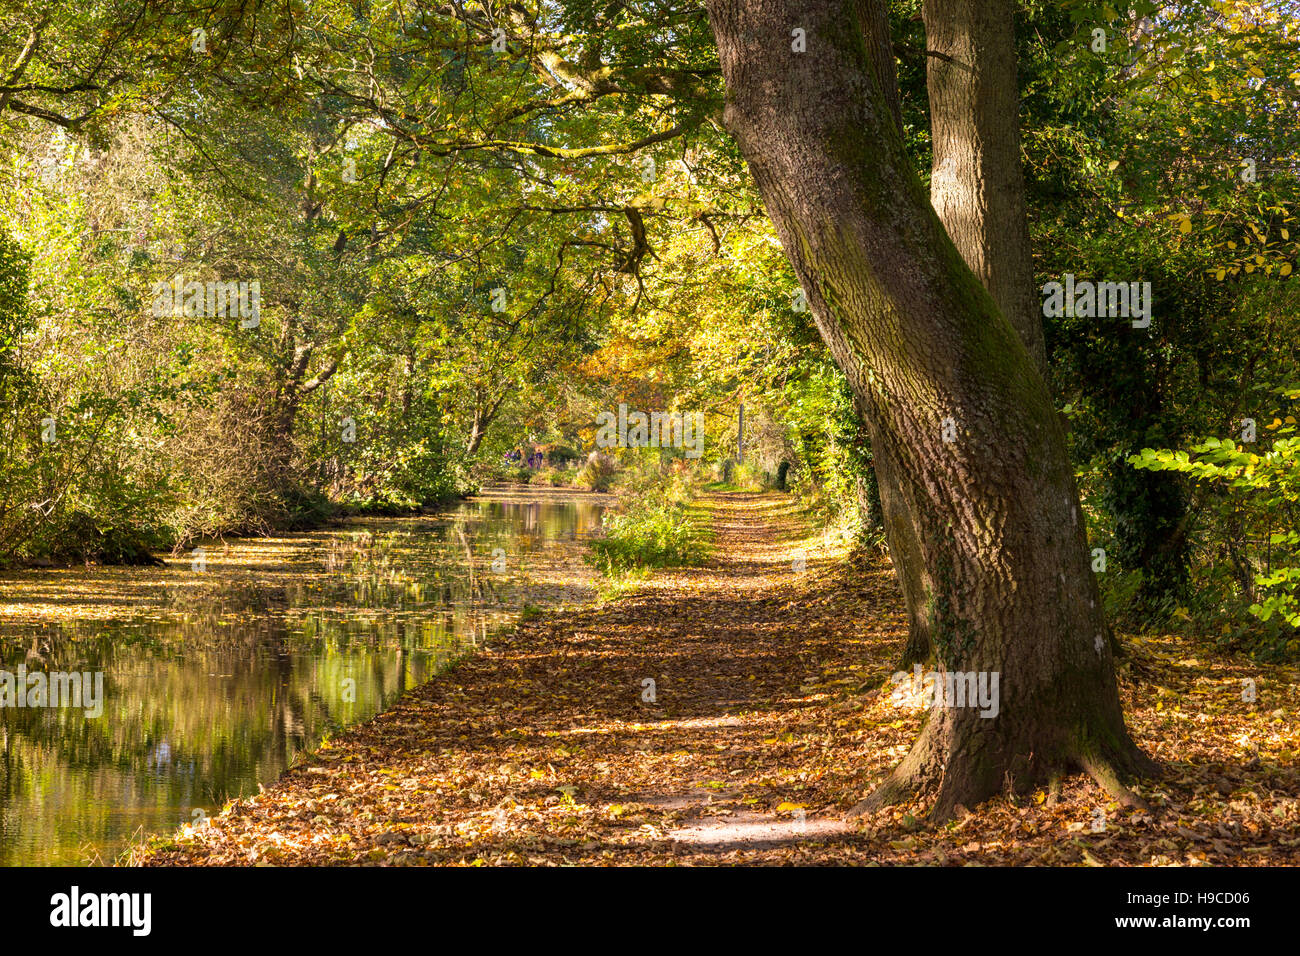 Autumn on the Monmouthshire & Brecon Canal, Brecon Beacons National Park, Wales, UK Stock Photo